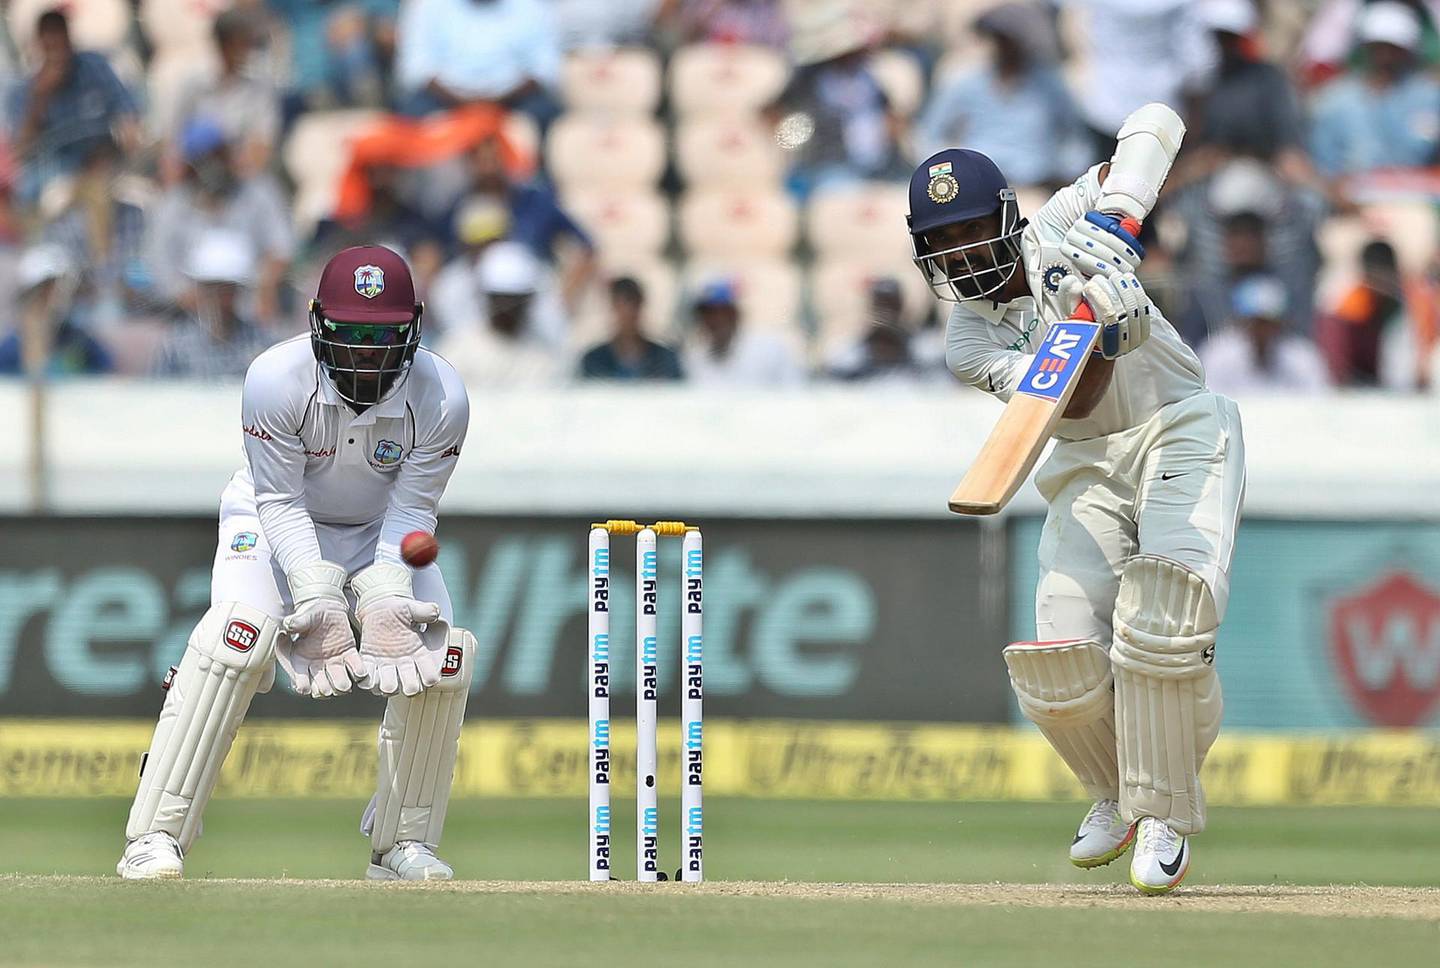 Indian cricketer Ajinkya Rahane bats during the second day of the second cricket test match between India and West Indies in Hyderabad, India, Saturday, Oct. 13, 2018. (AP Photo/Mahesh Kumar A.)